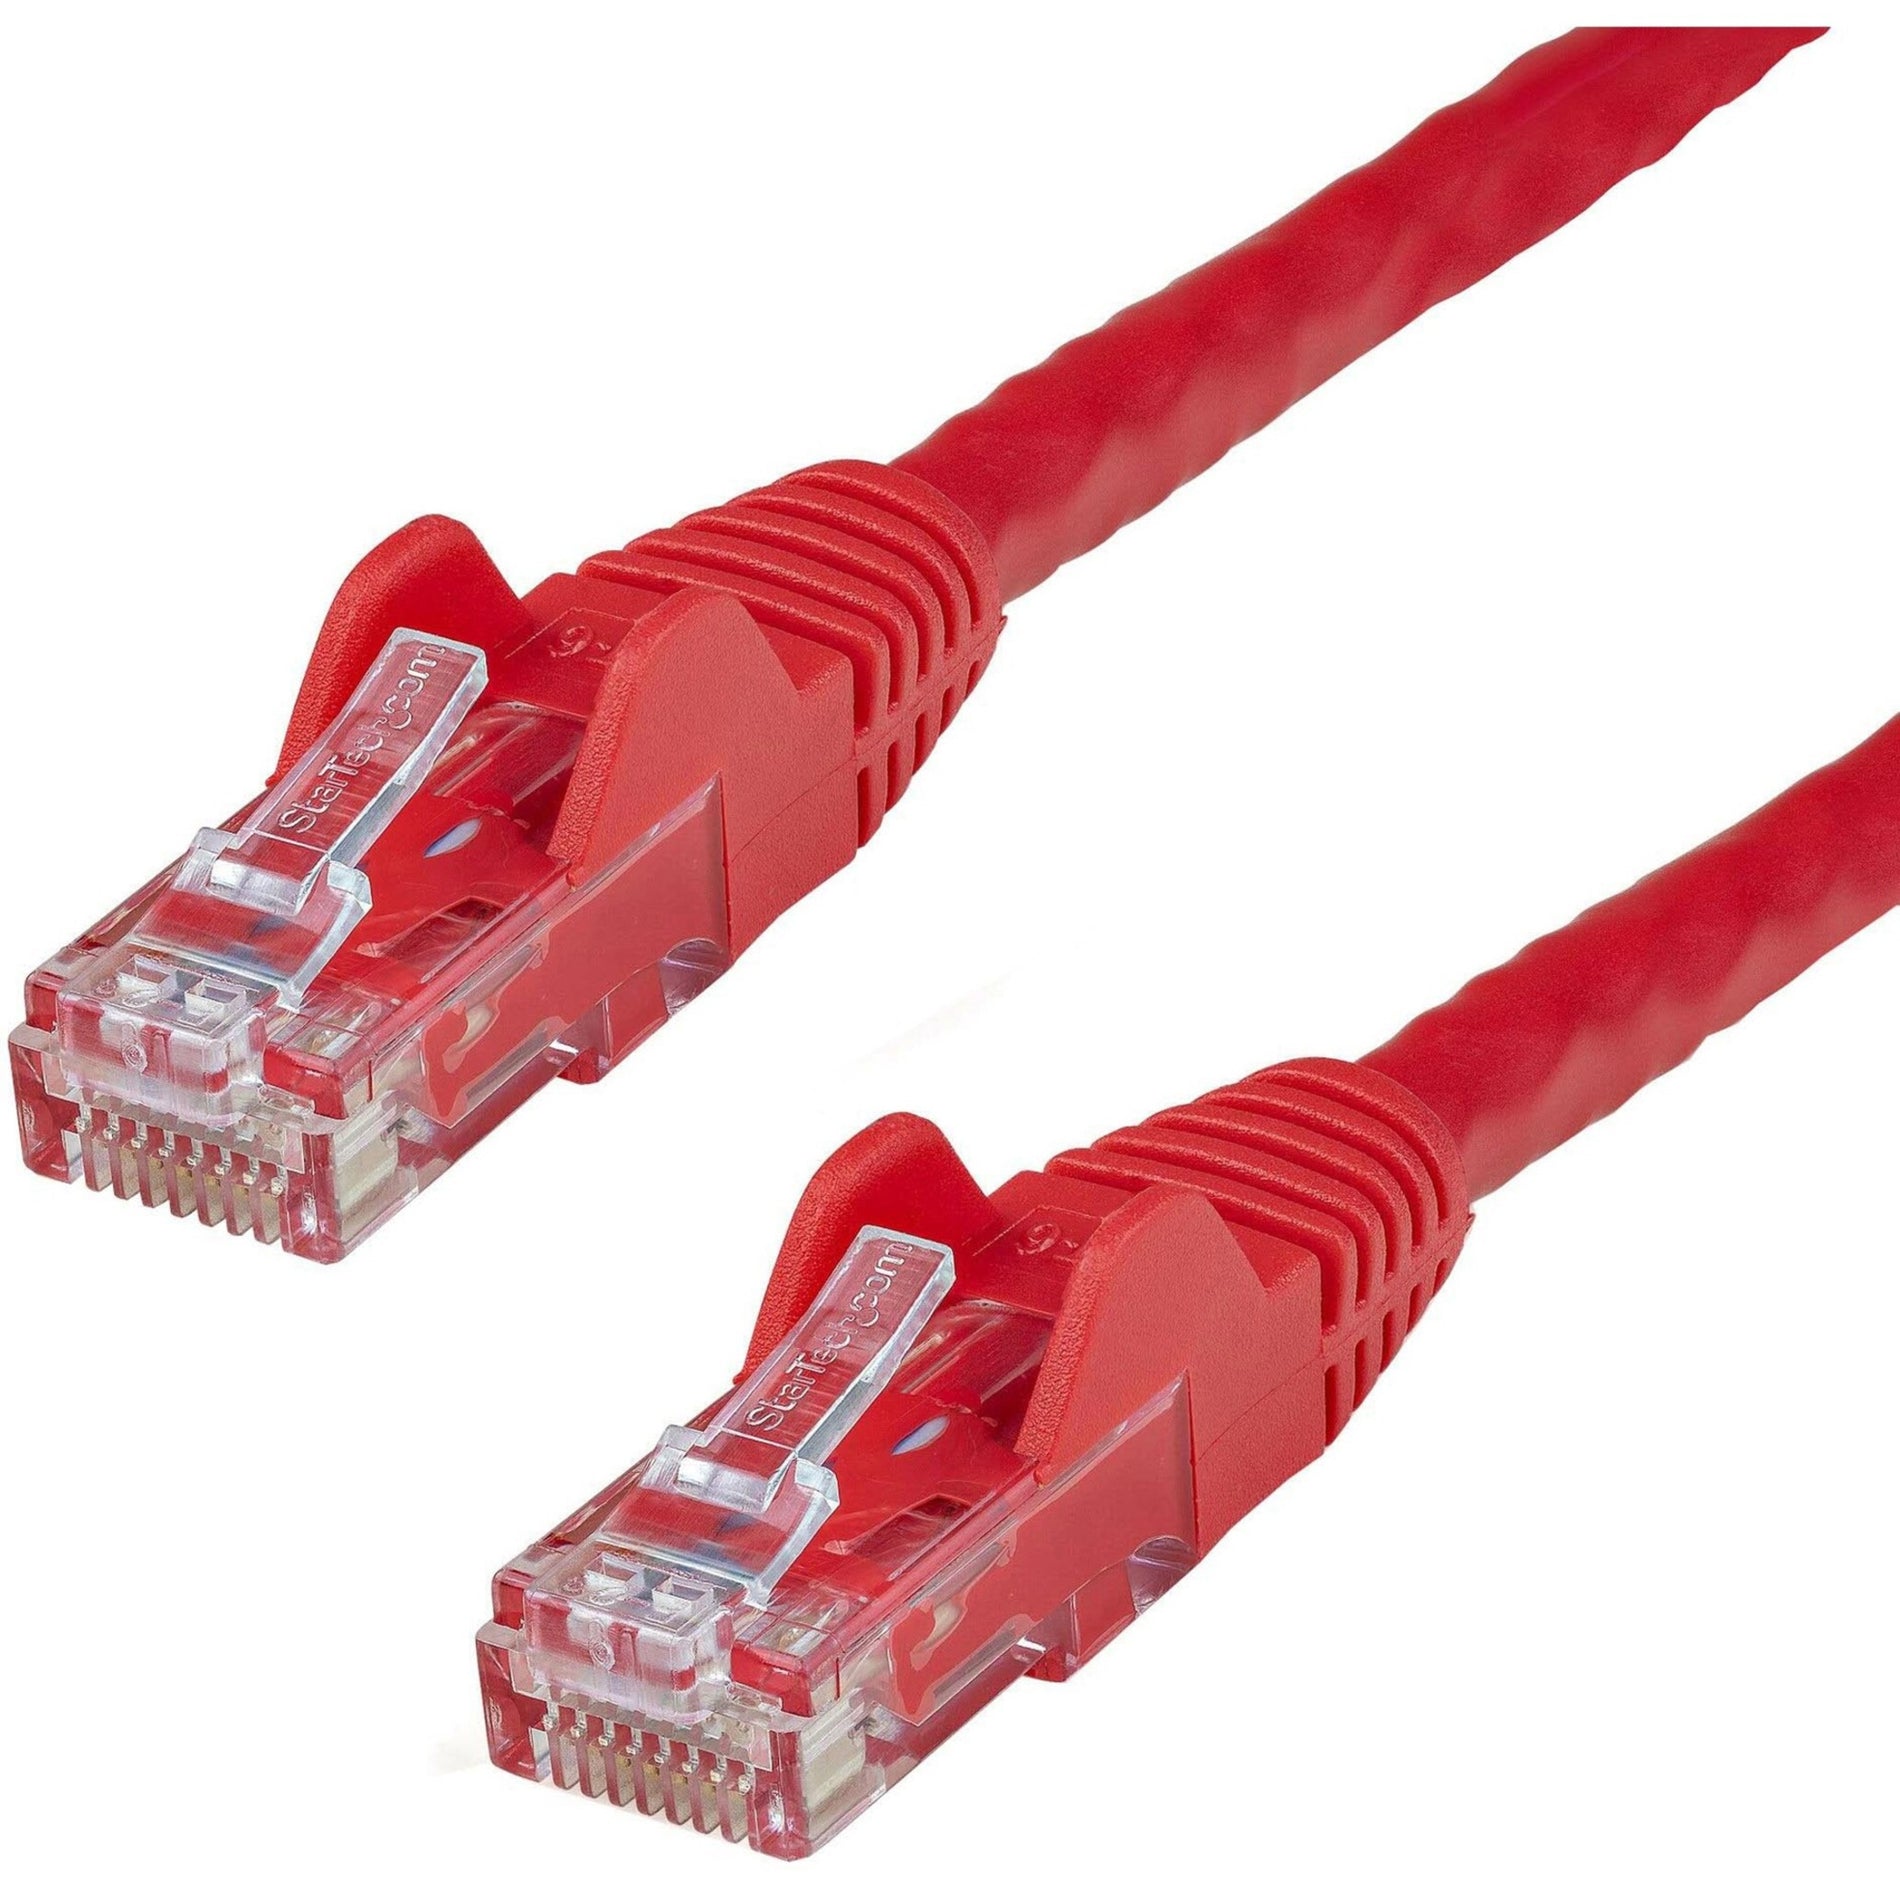 StarTech.com N6PATCH100RD 100 ft Red Snagless Cat6 UTP Patch Cable, 10 Gbit/s Data Transfer Rate, Strain Relief